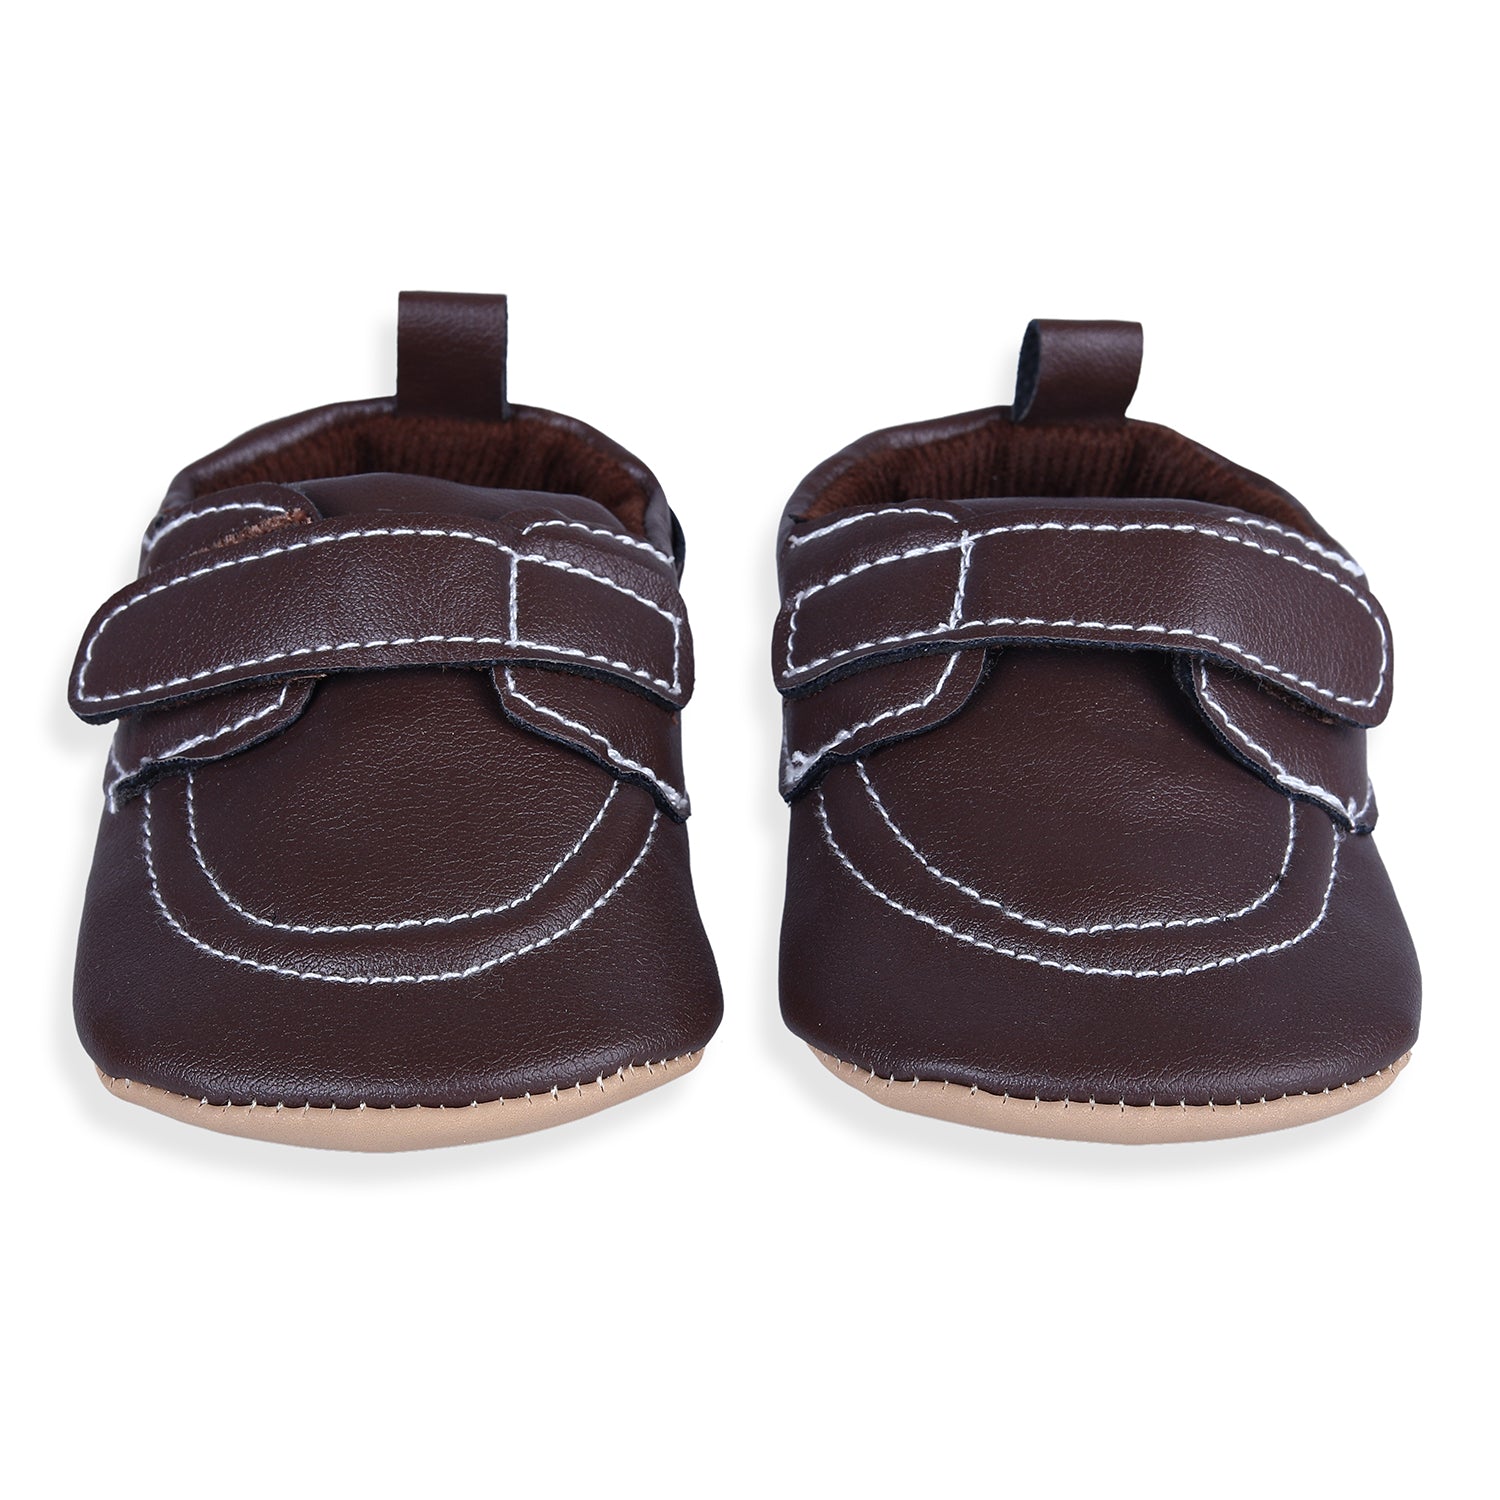 Baby Moo Solid Hookloop Stylish Leather Velcro Shoes - Brown